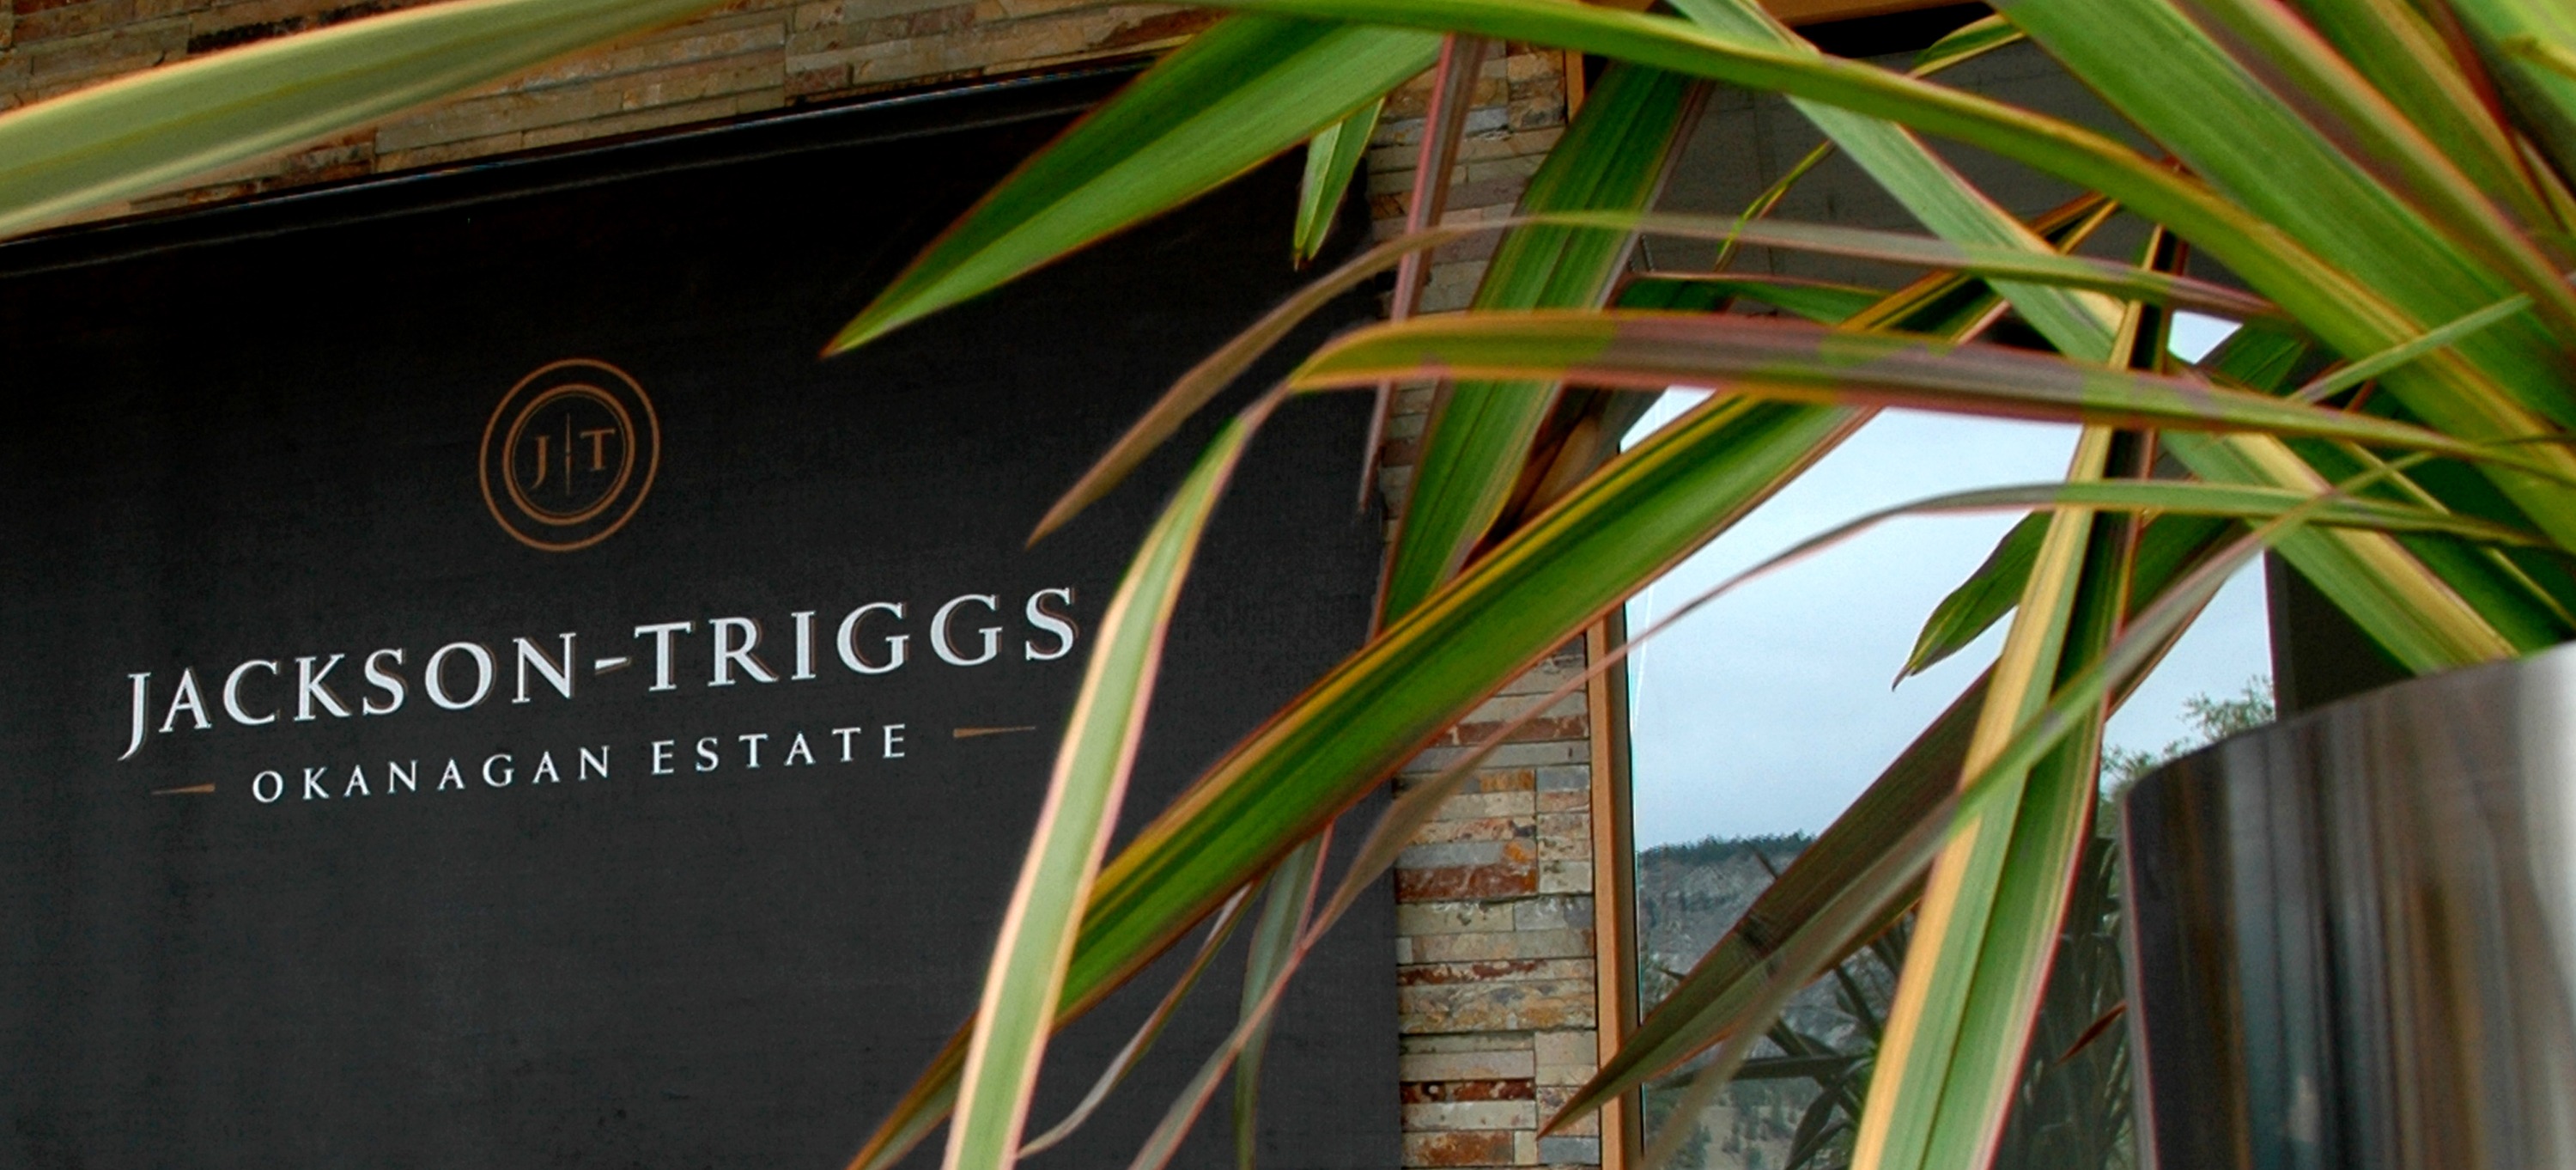 Jackson Triggs Signage | Dossier Creative | Revitalizing a Legacy